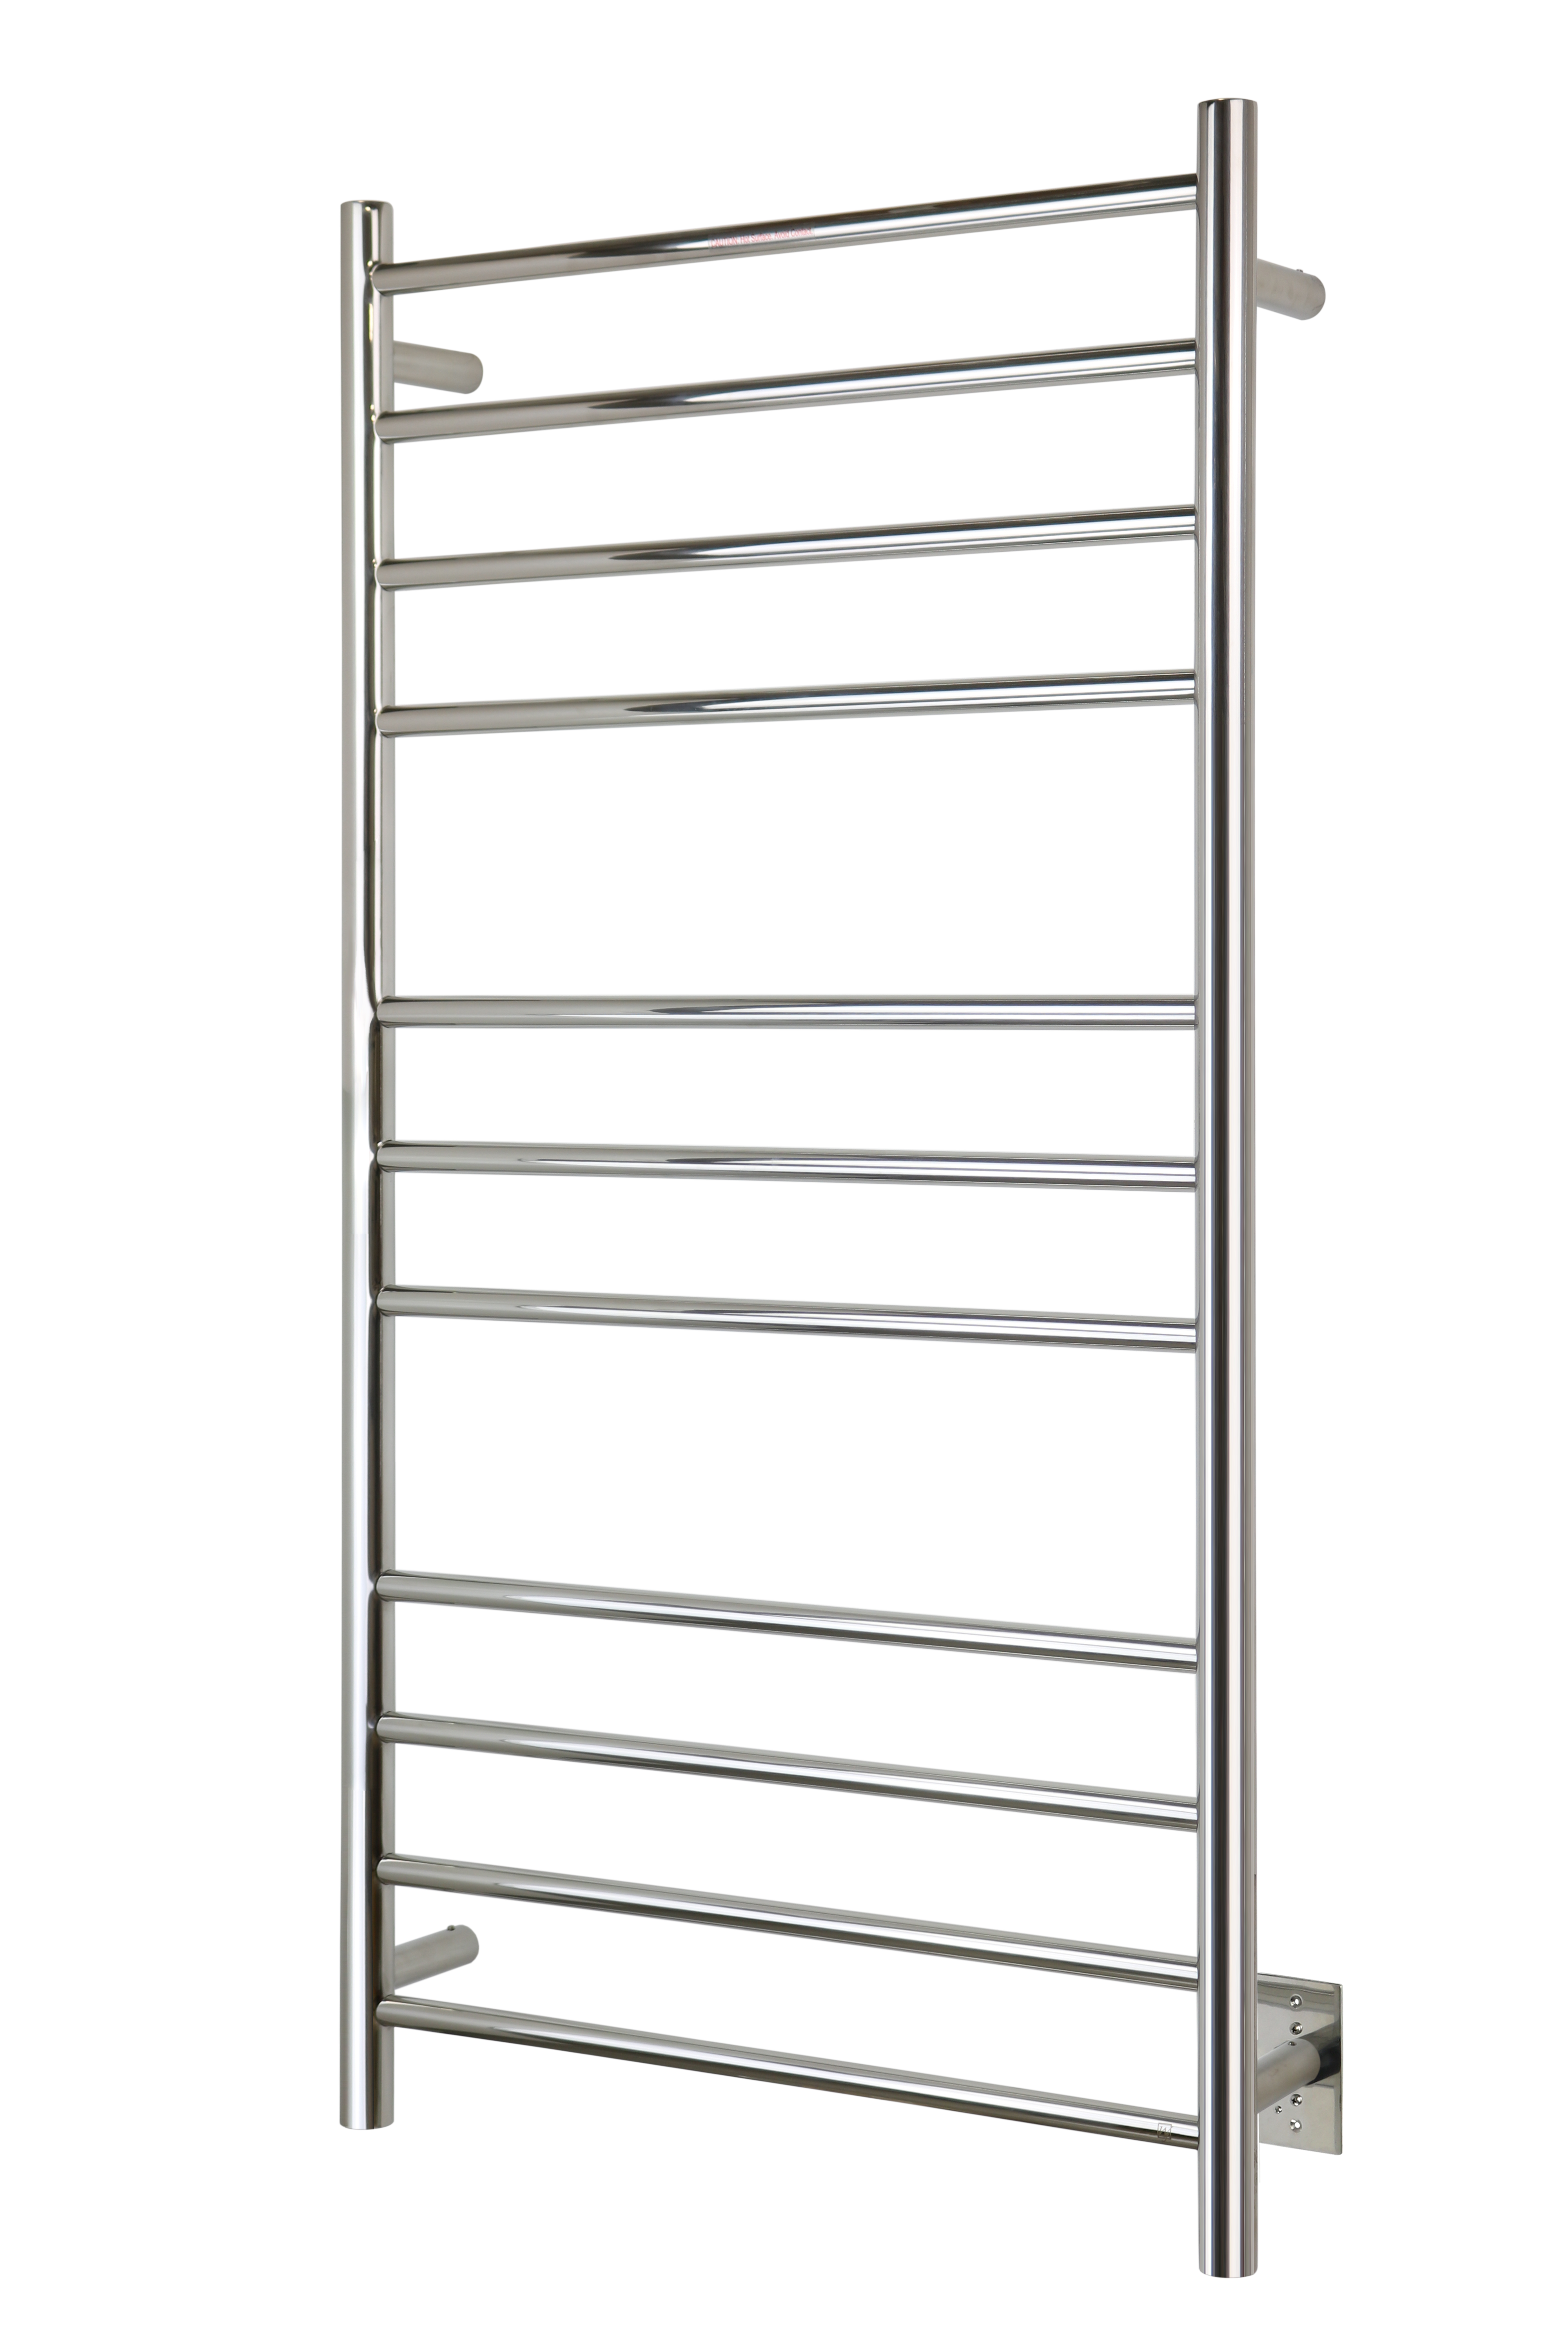 New Electric Heated Rail Towel Warmer Bar 1 Rung Polished Stainless Steel Luxury 